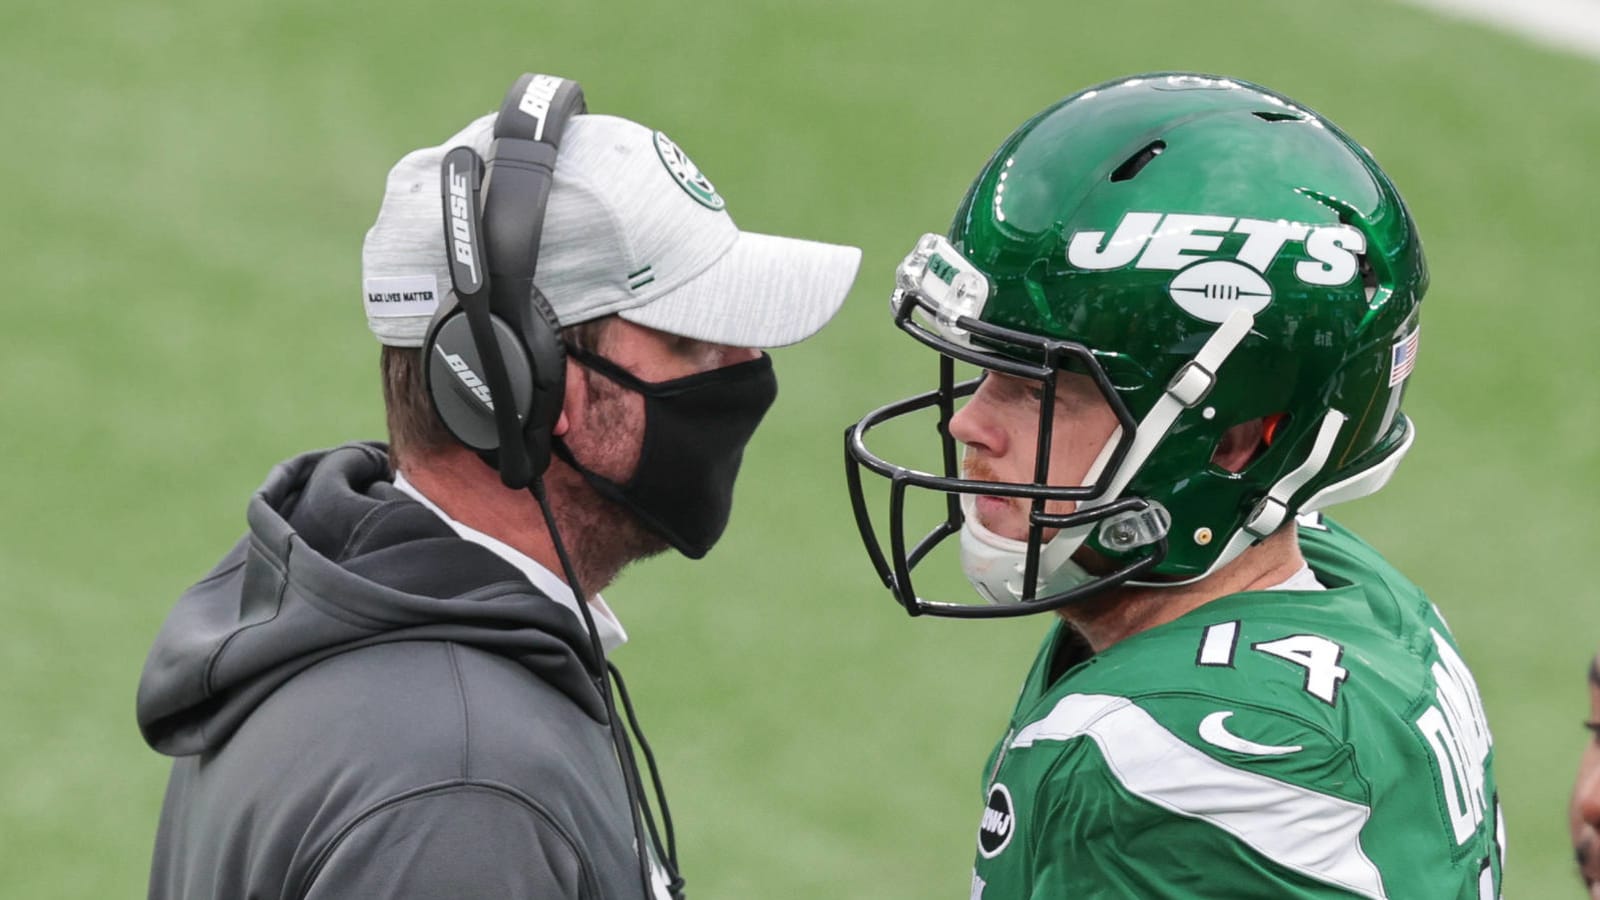 Jets head coach Adam Gase still committed to Sam Darnold as starting QB